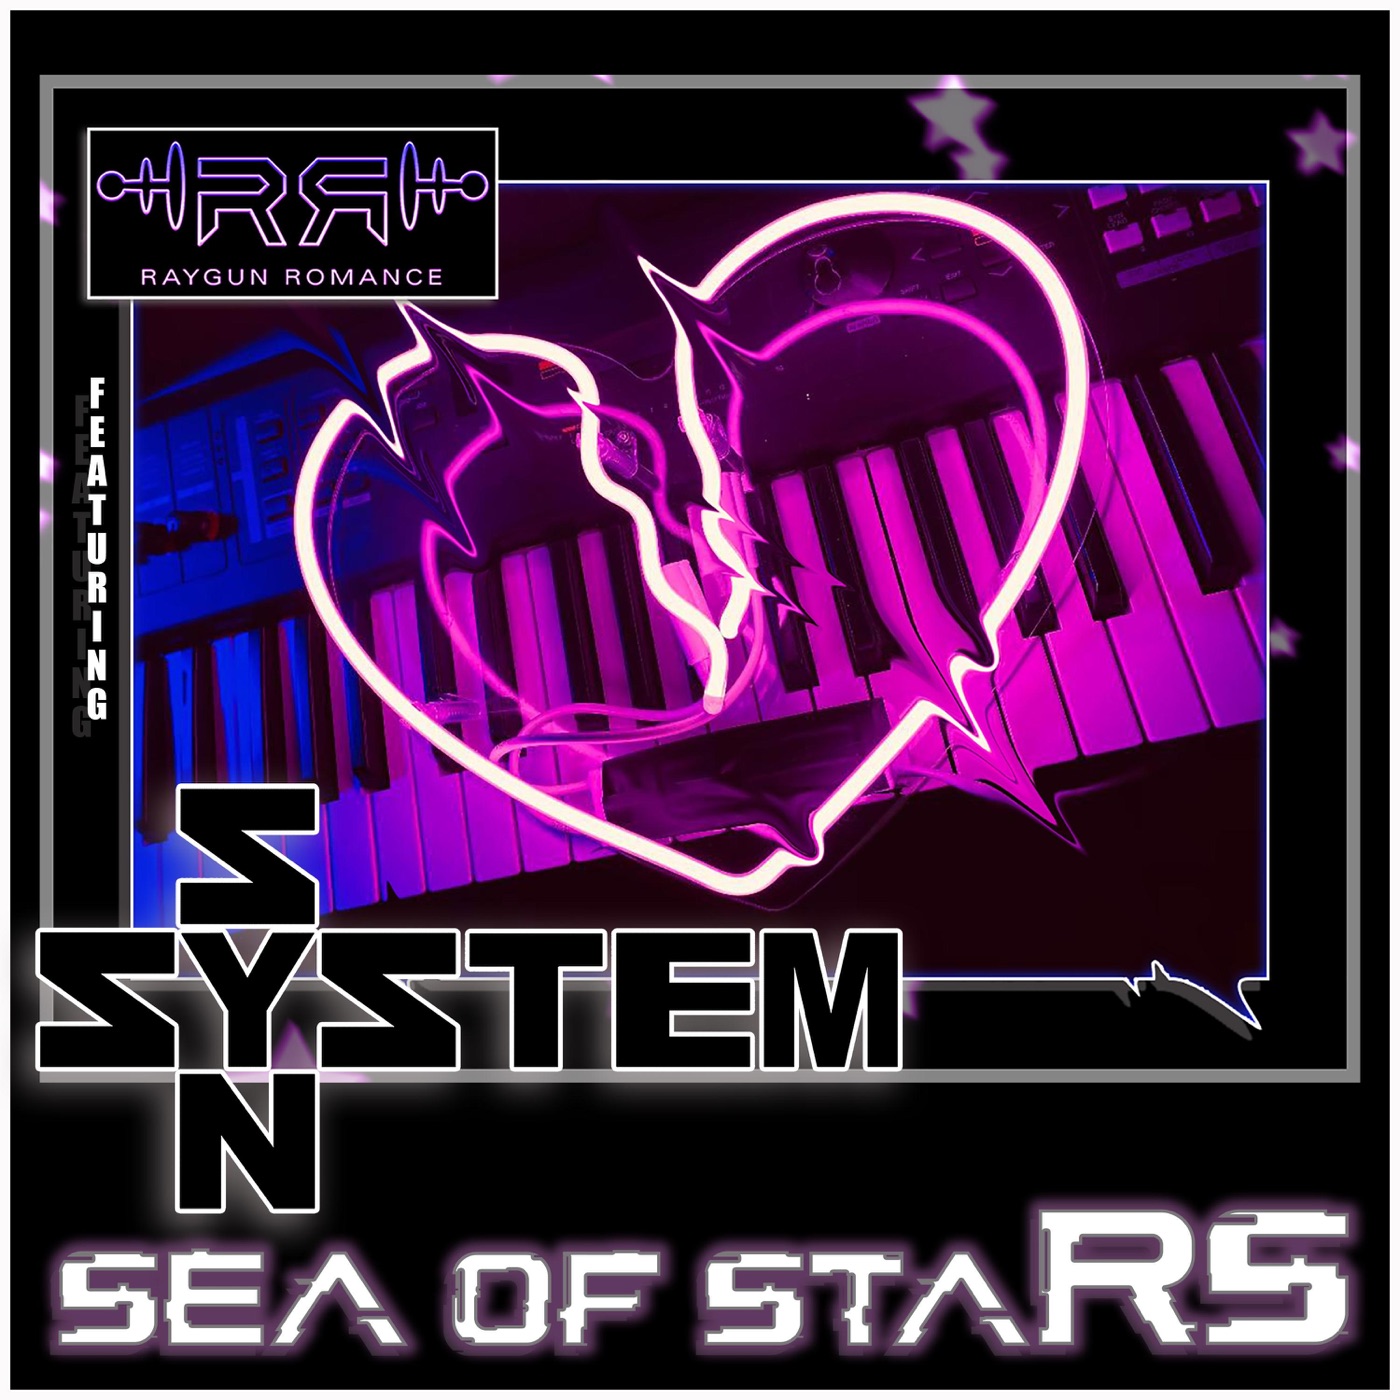 Raygun Romance - Sea Of Stars (feat. System Syn)